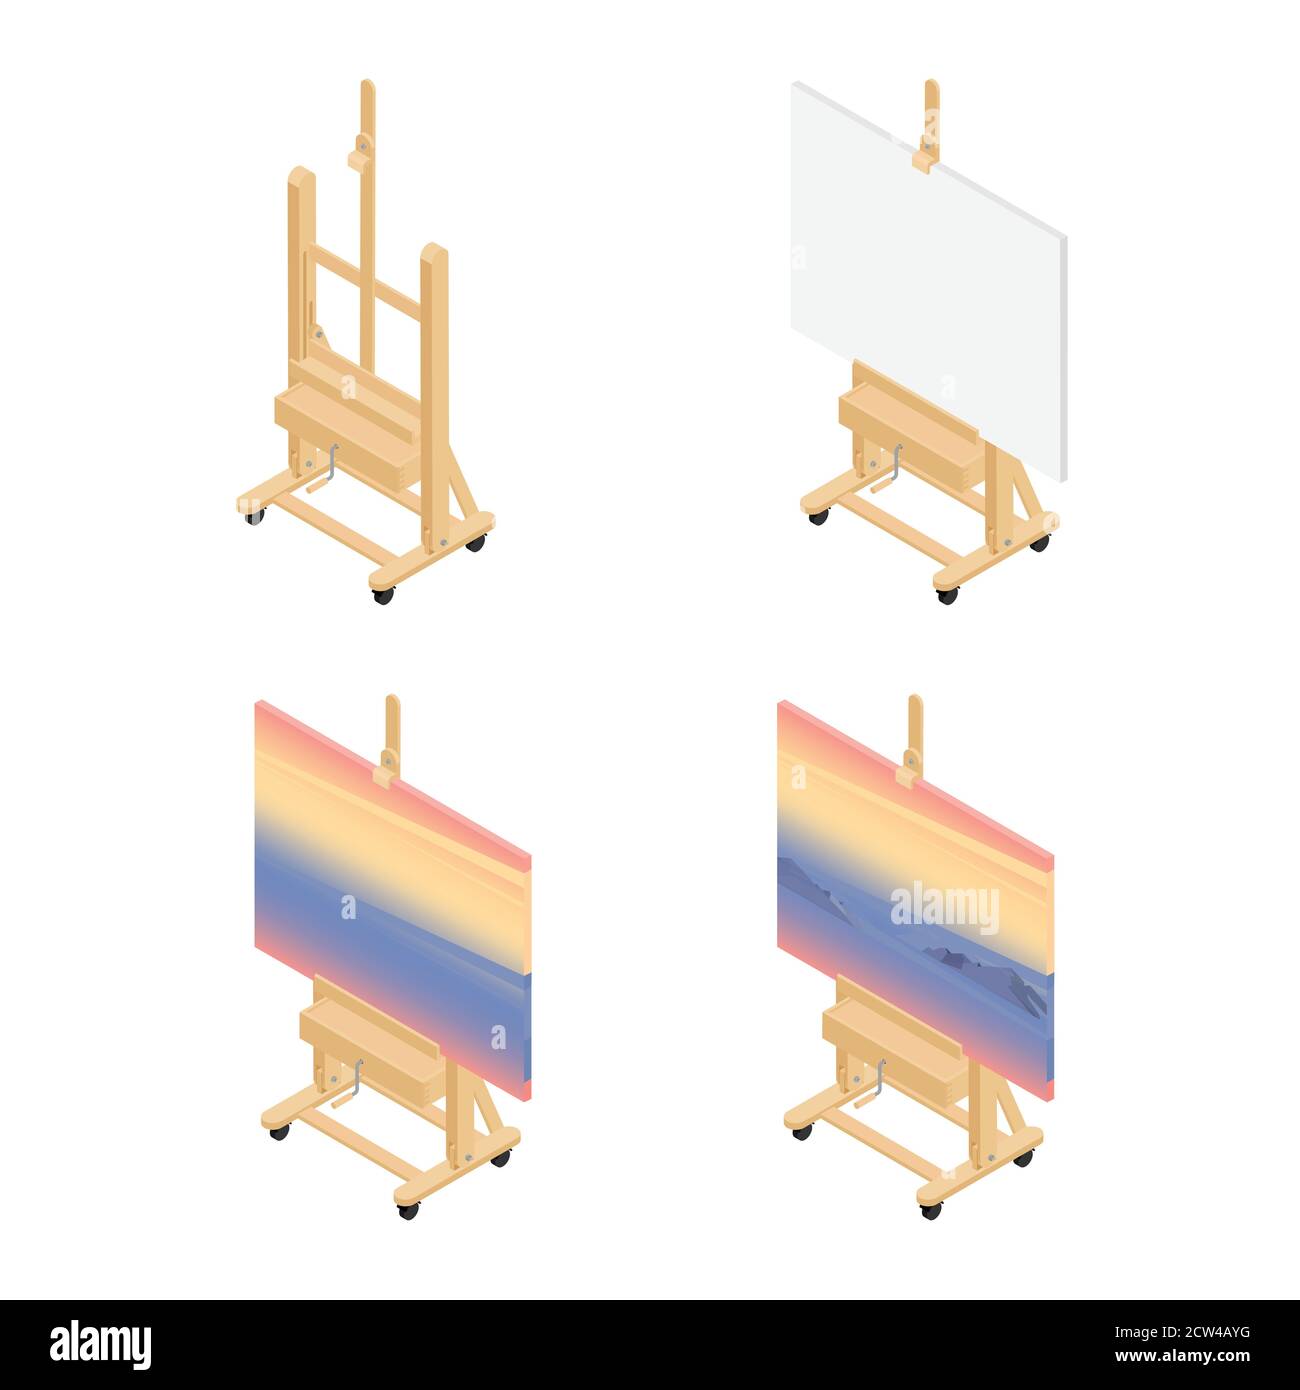 Easel for painting workshop. Paint artists workspace concept